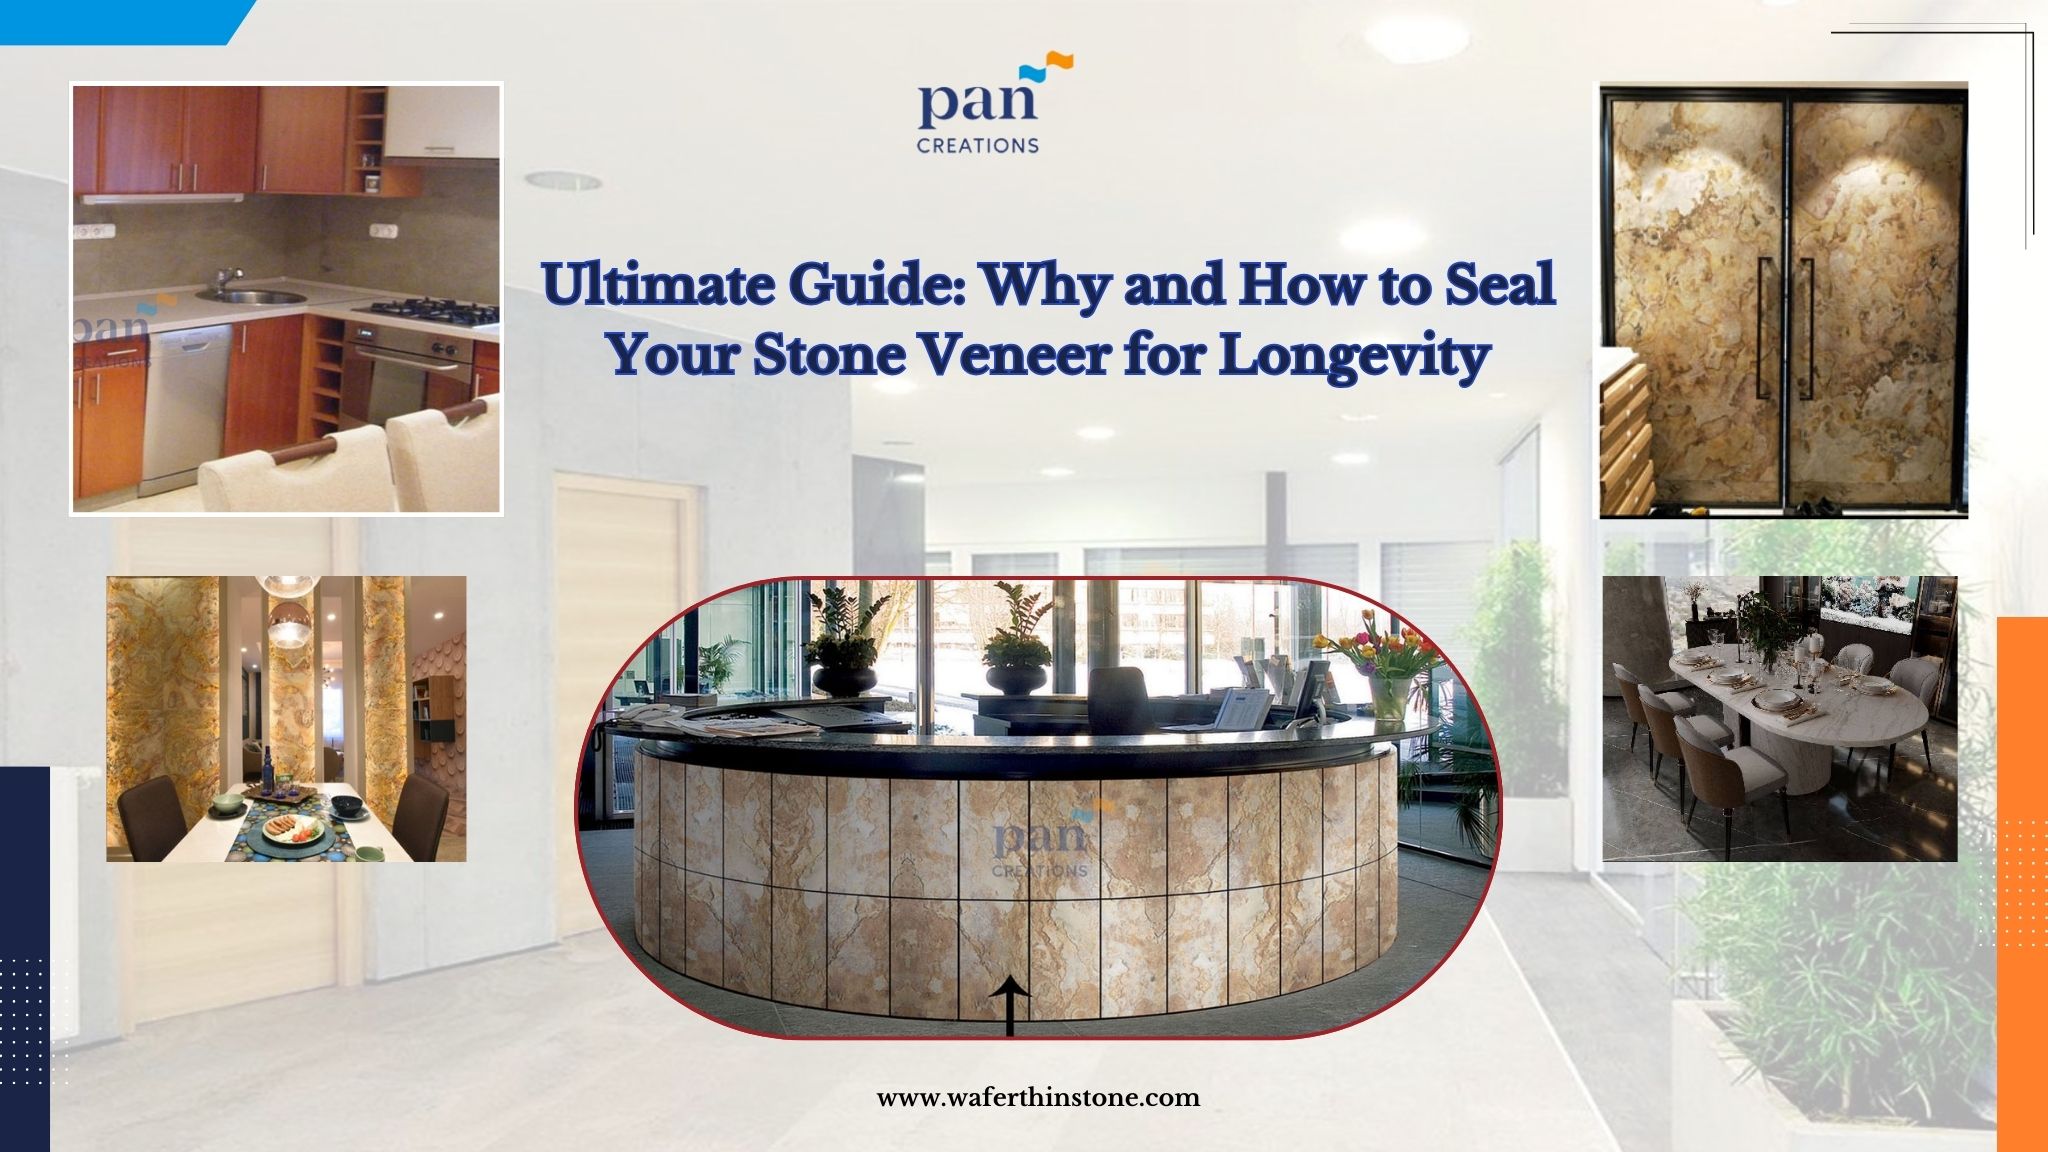 Ultimate Guide: Why and How to Seal Your Stone Veneer for Longevity